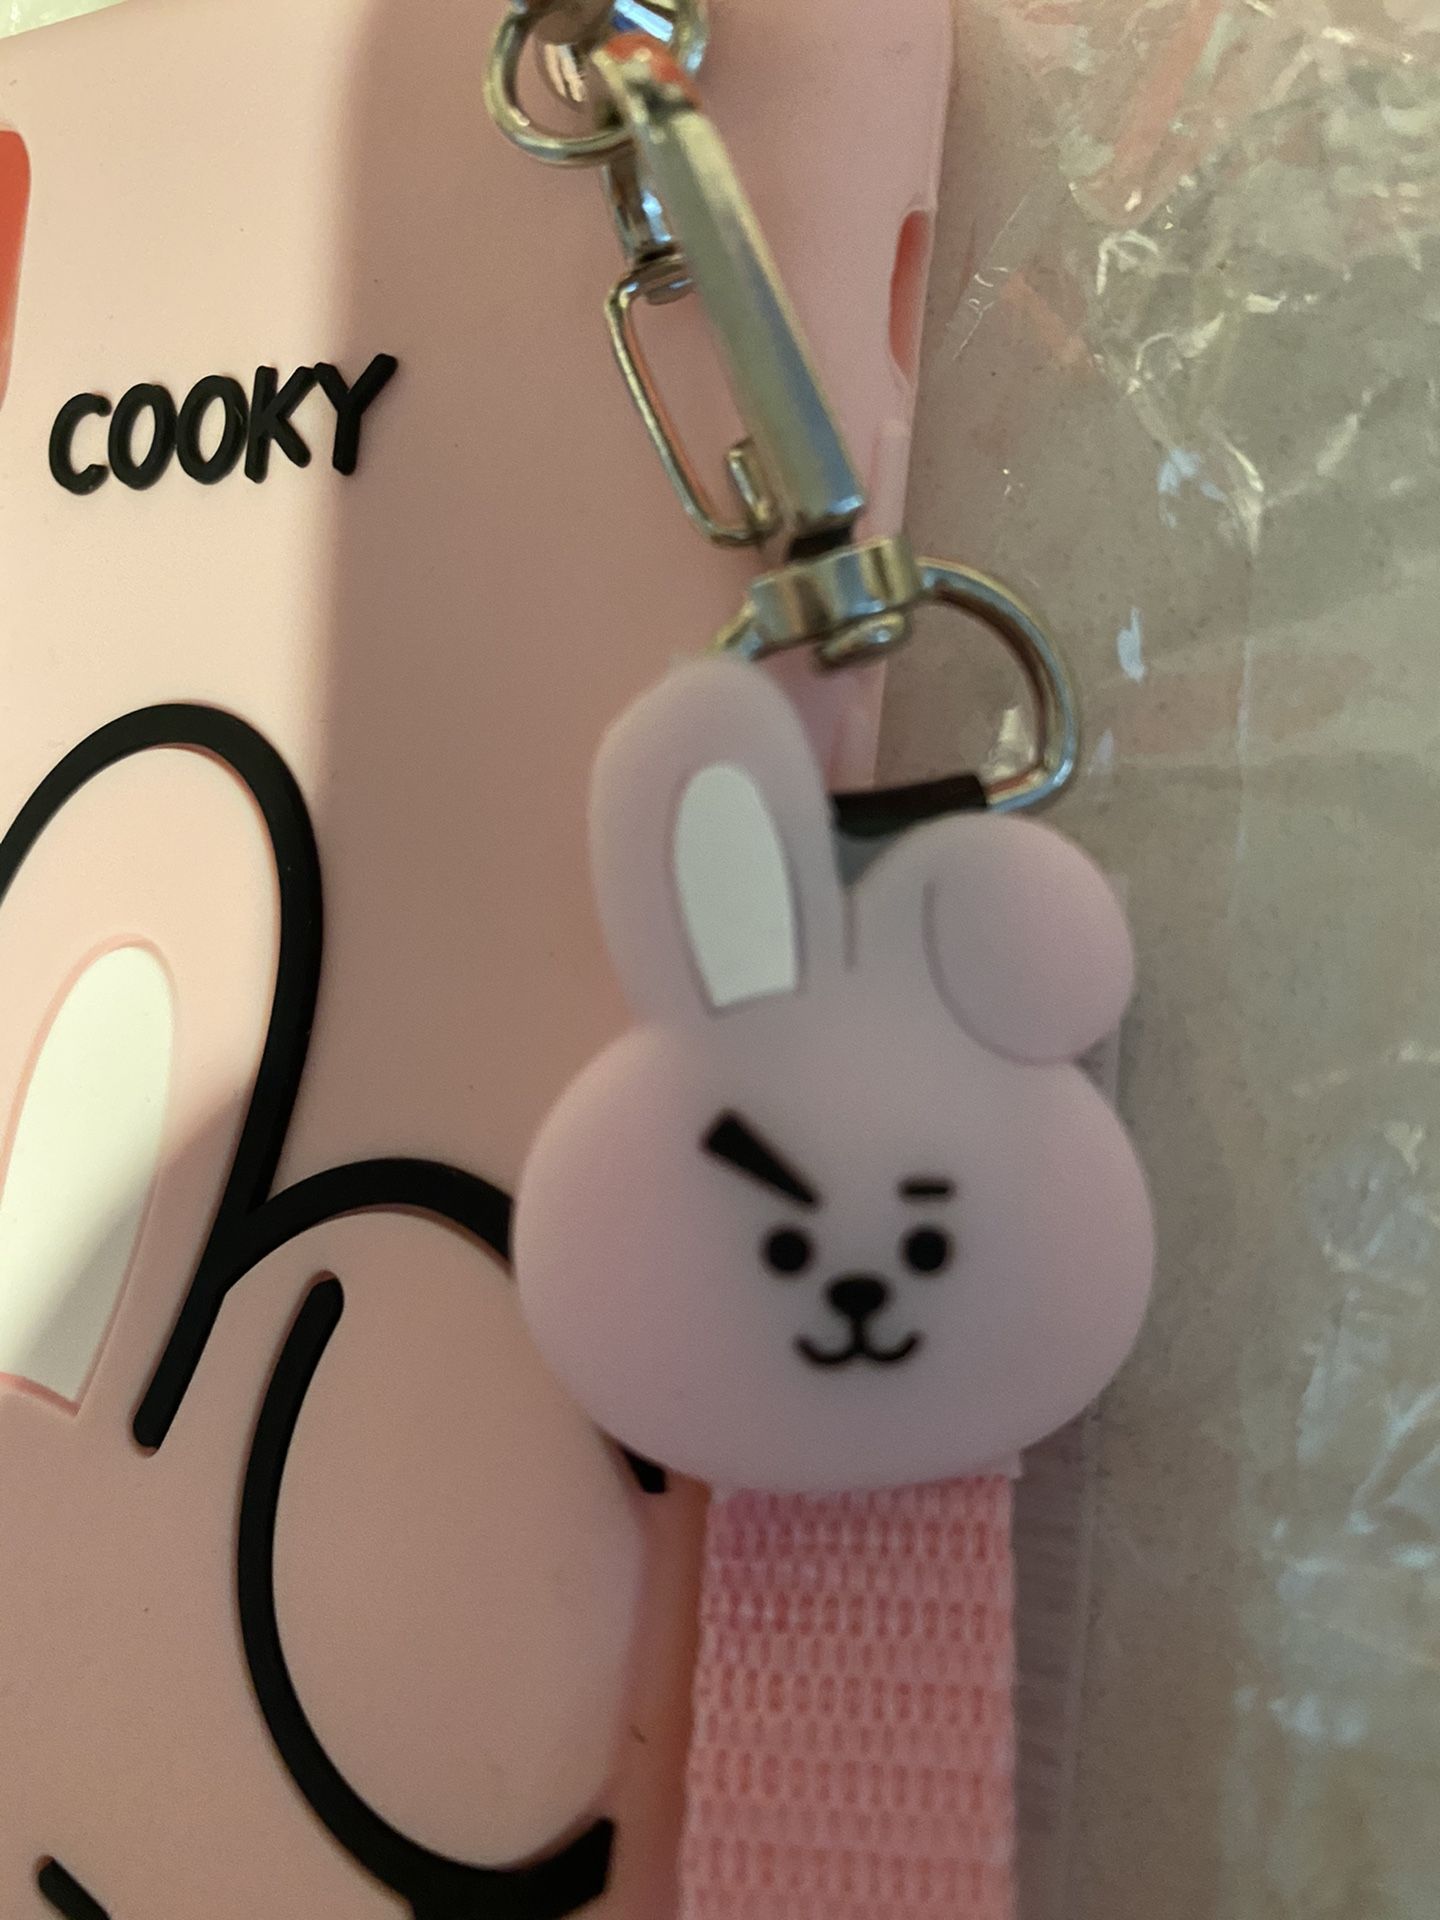 Cooky phone case